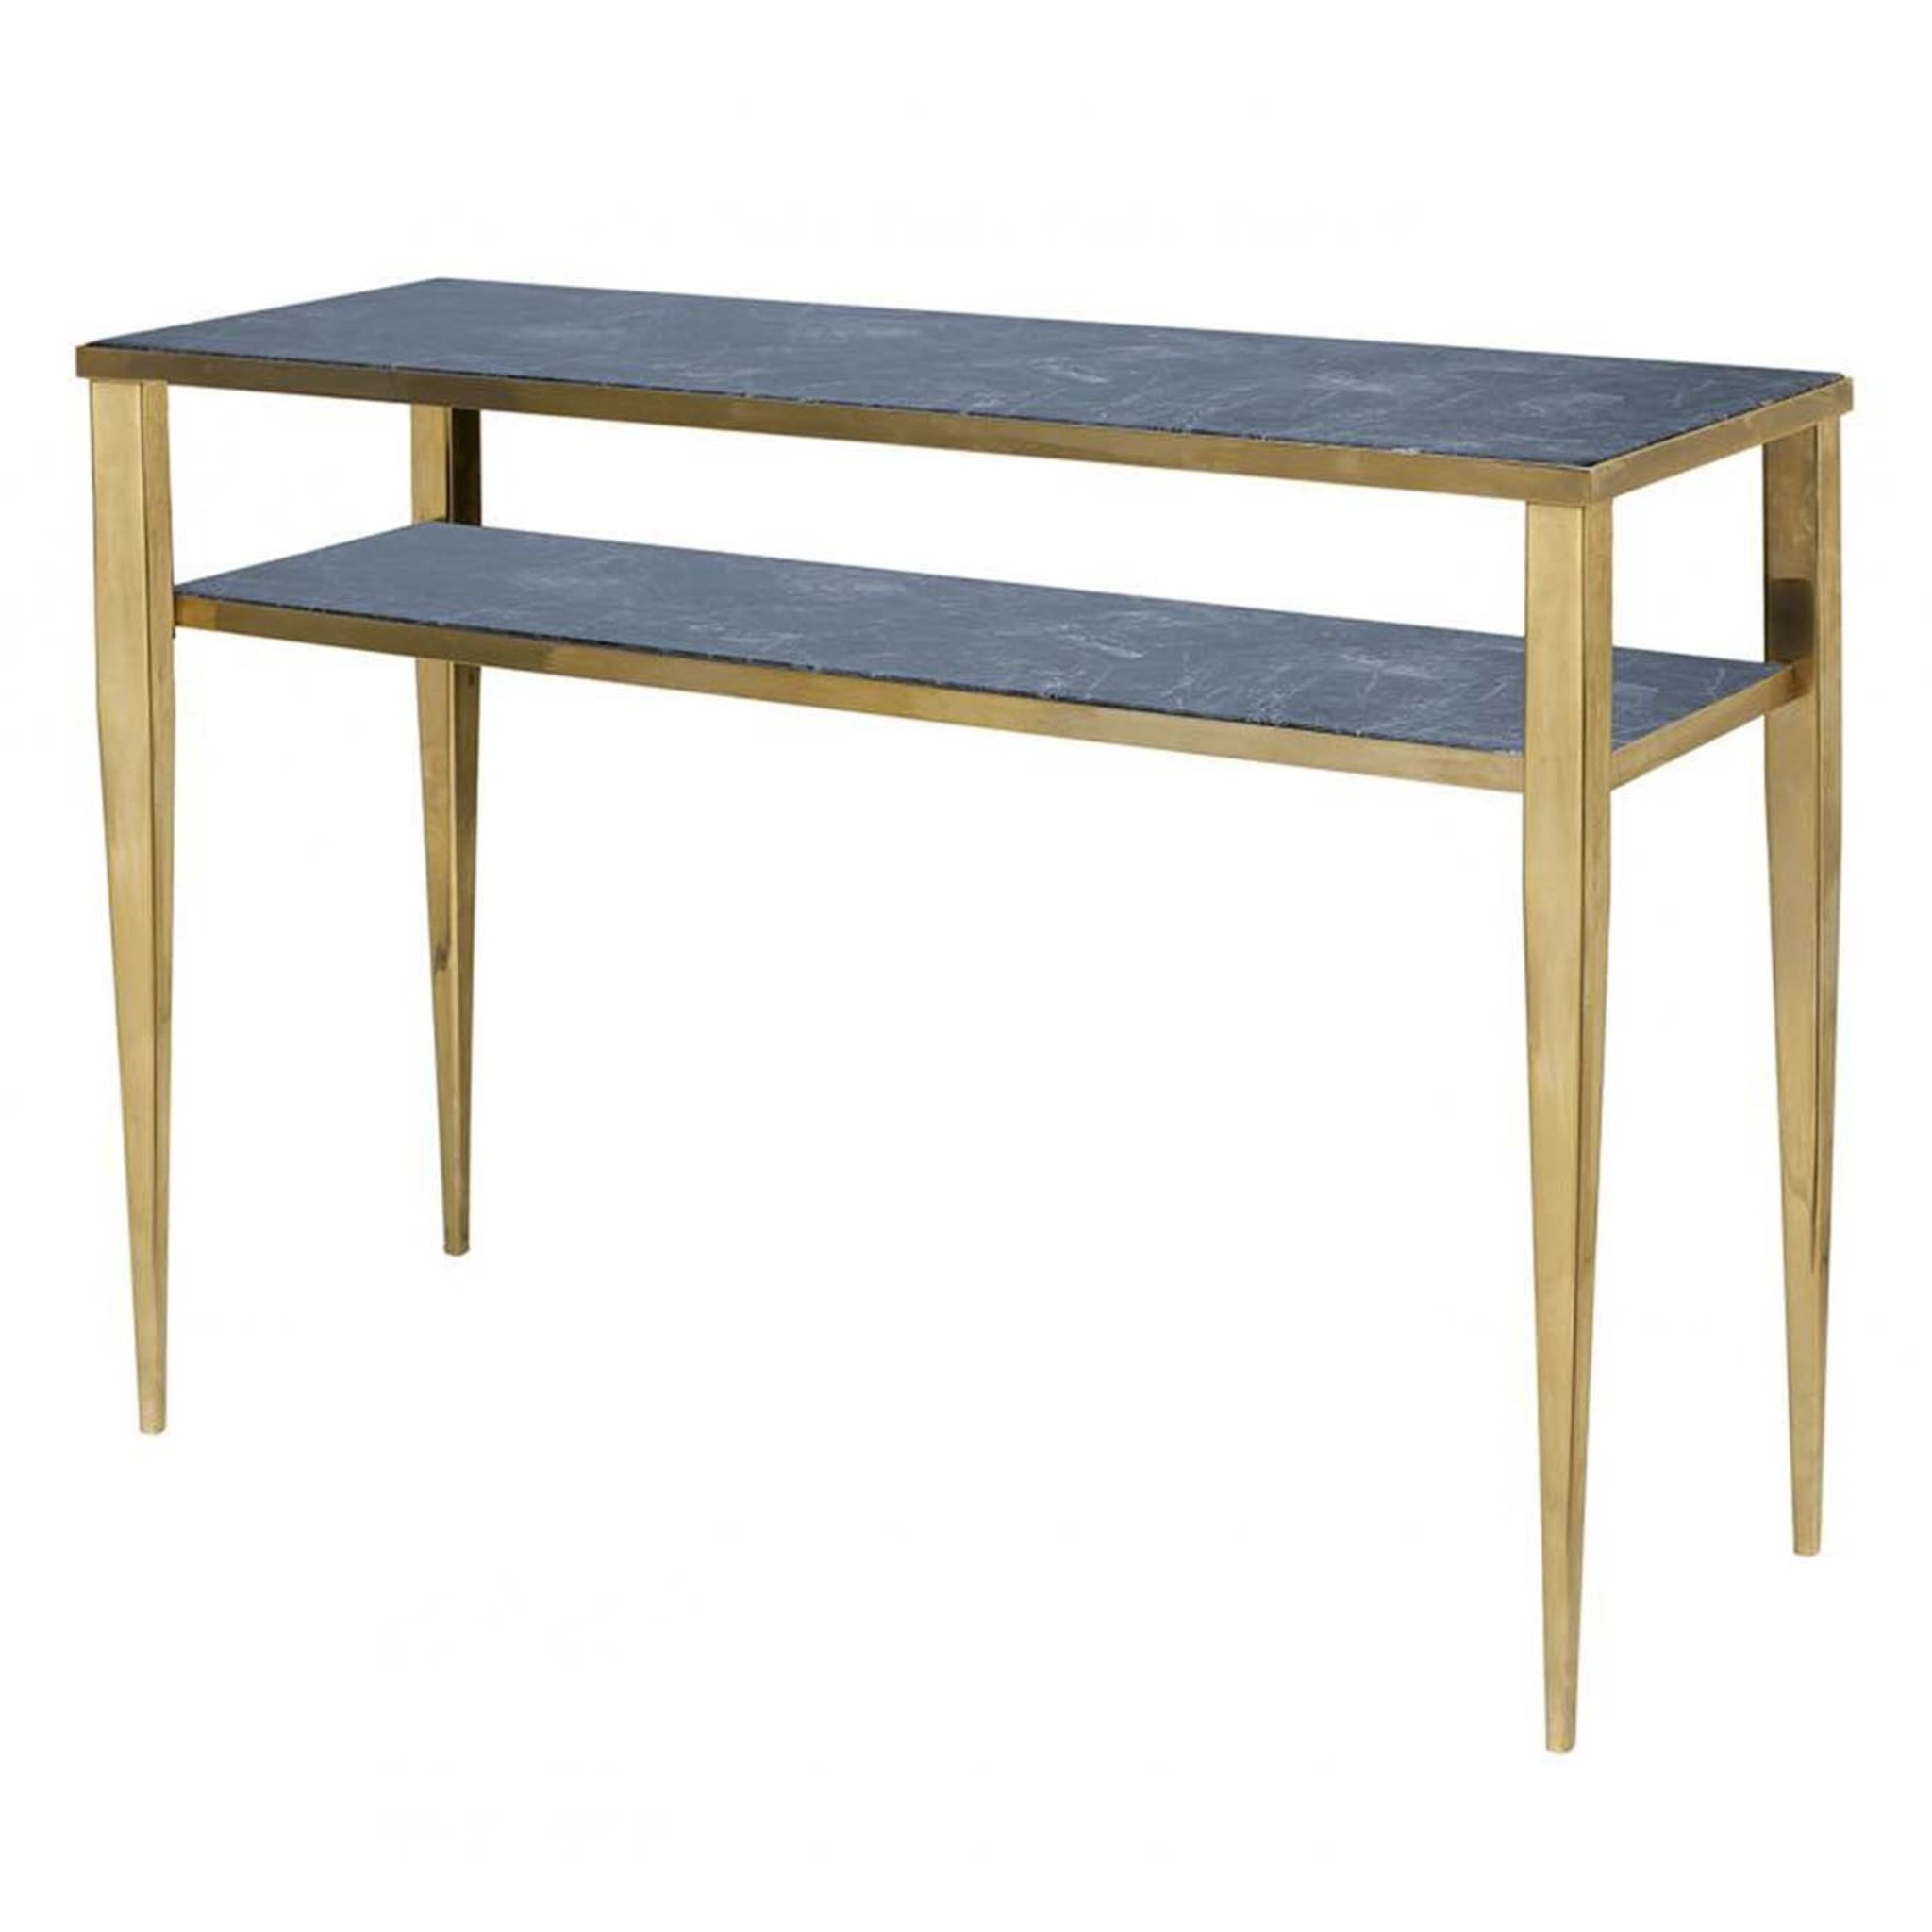  T 290 Console Table - Main view